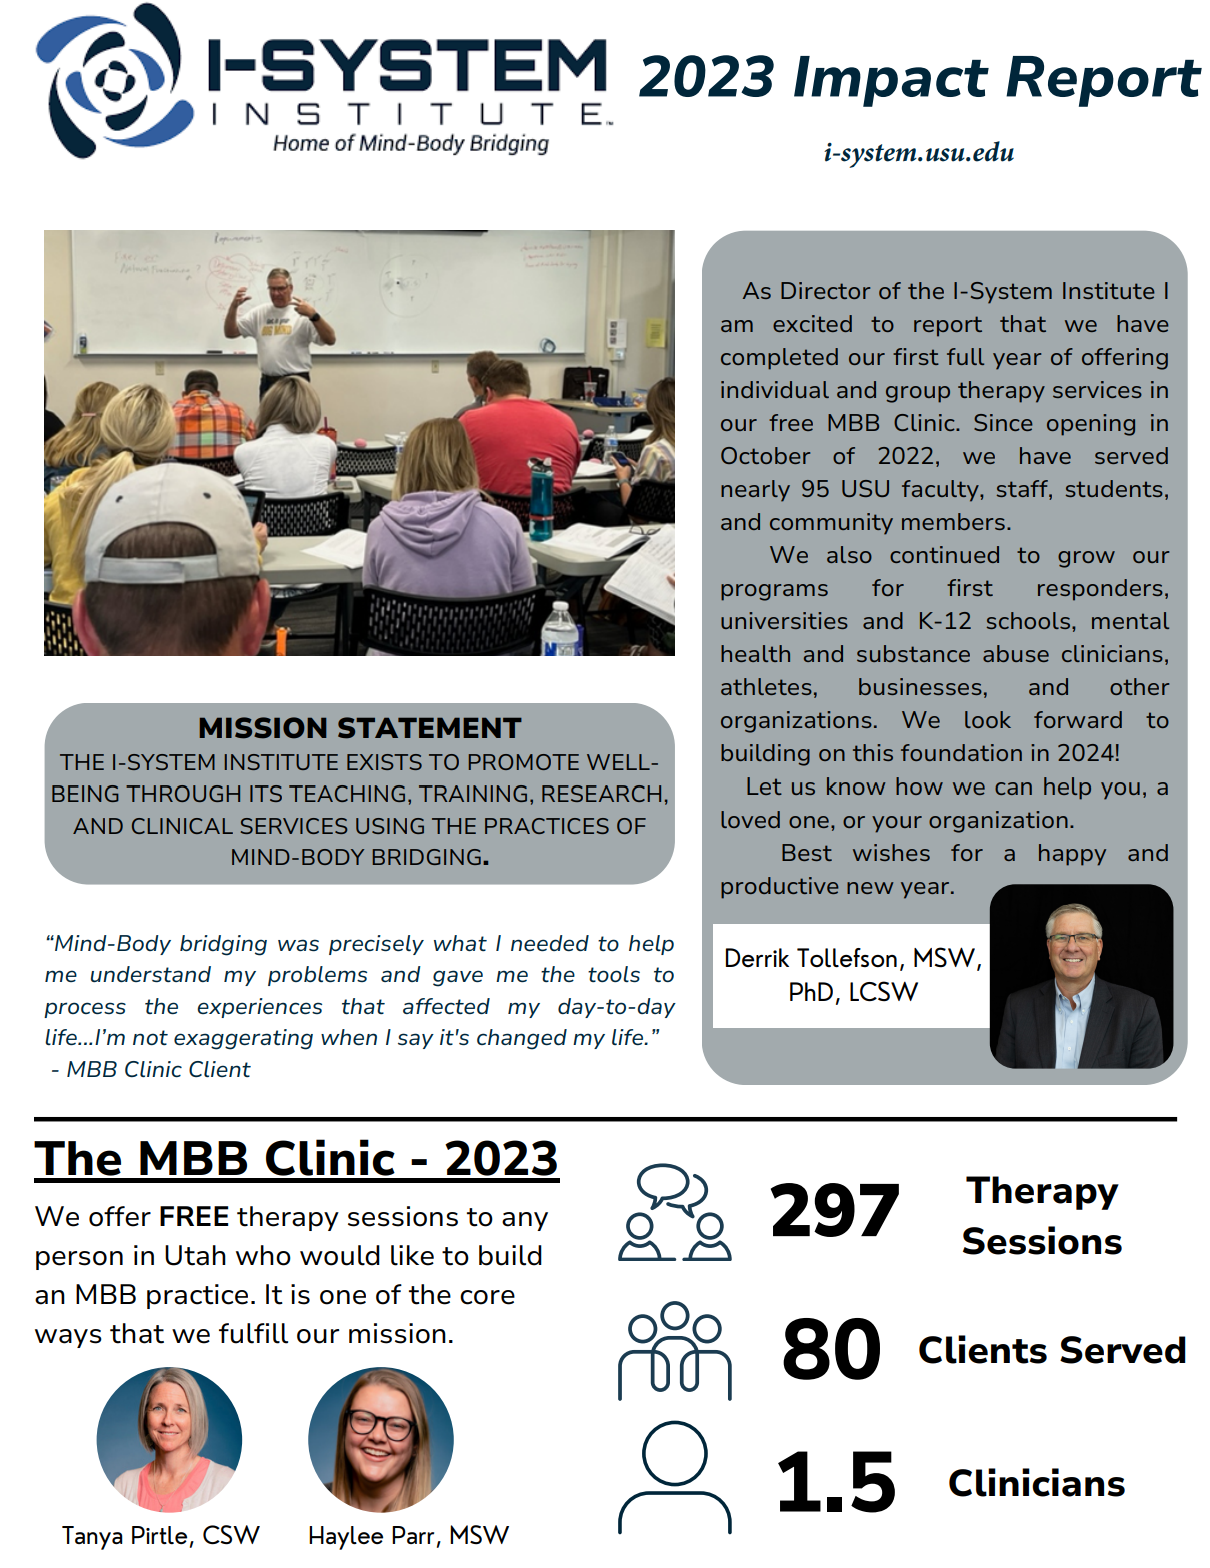 I system institute annual report pg 1, discussing the mission and purpose of I system insitute